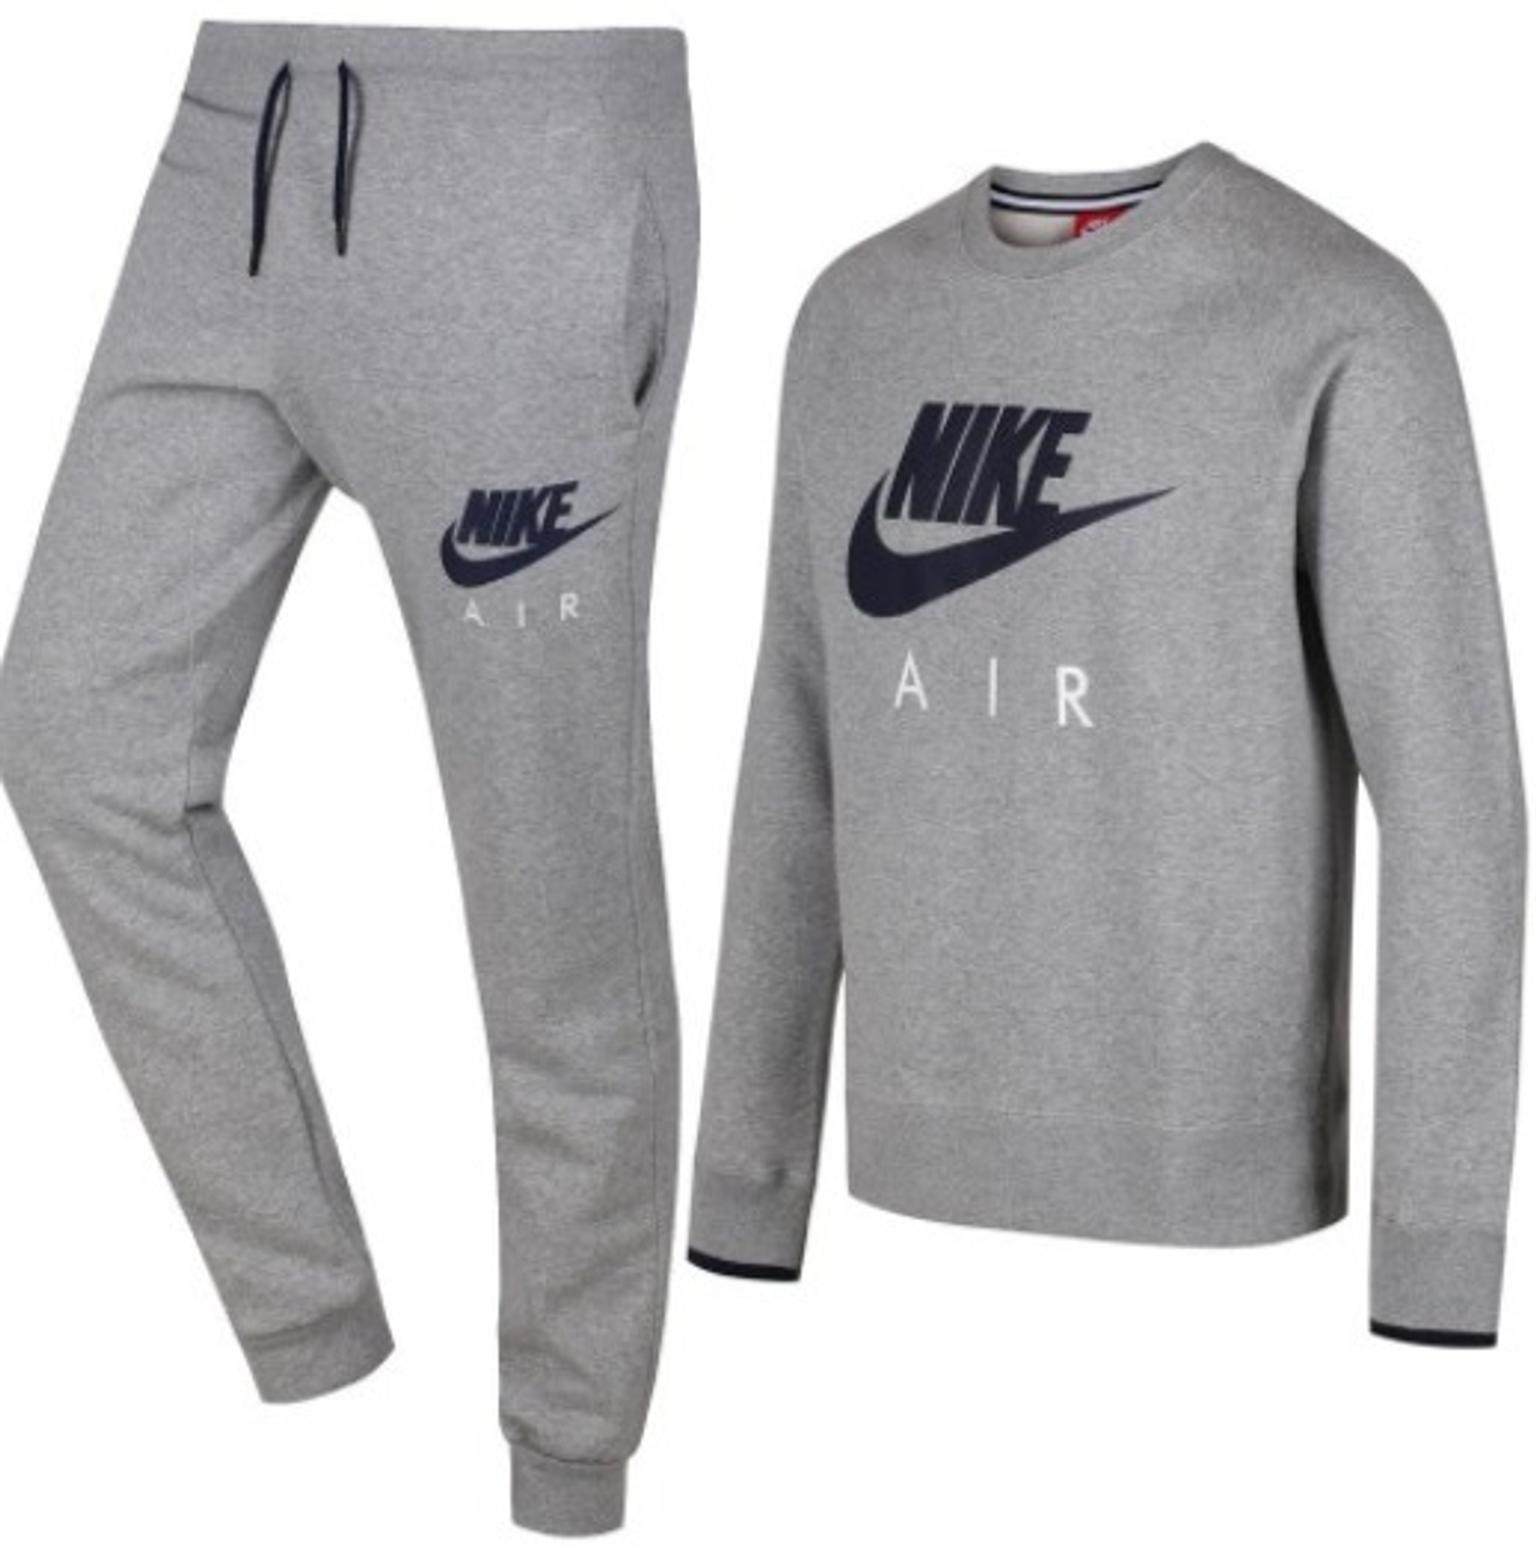 grey tracksuits